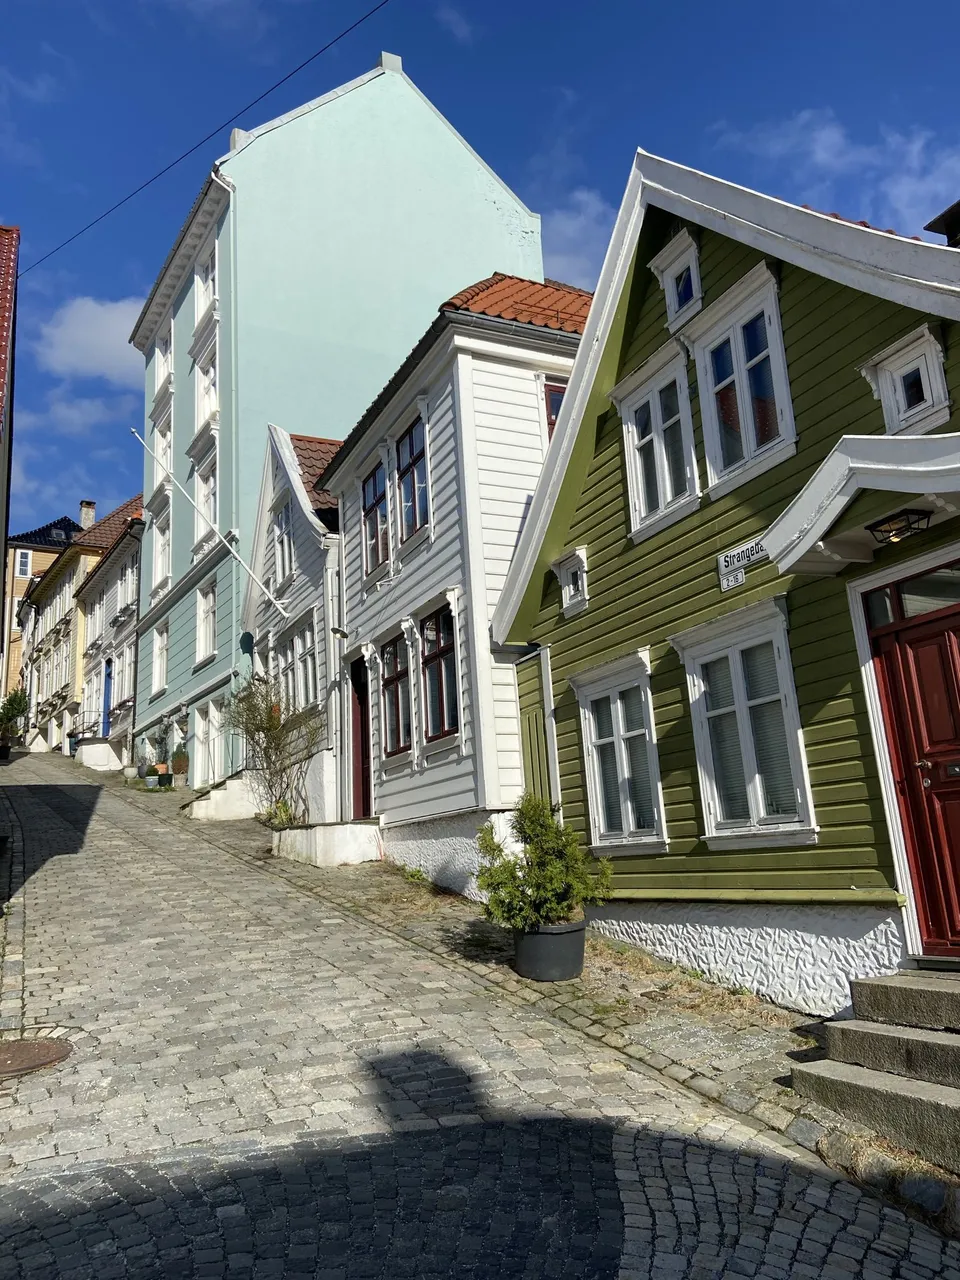 A colorful street on Nordnes